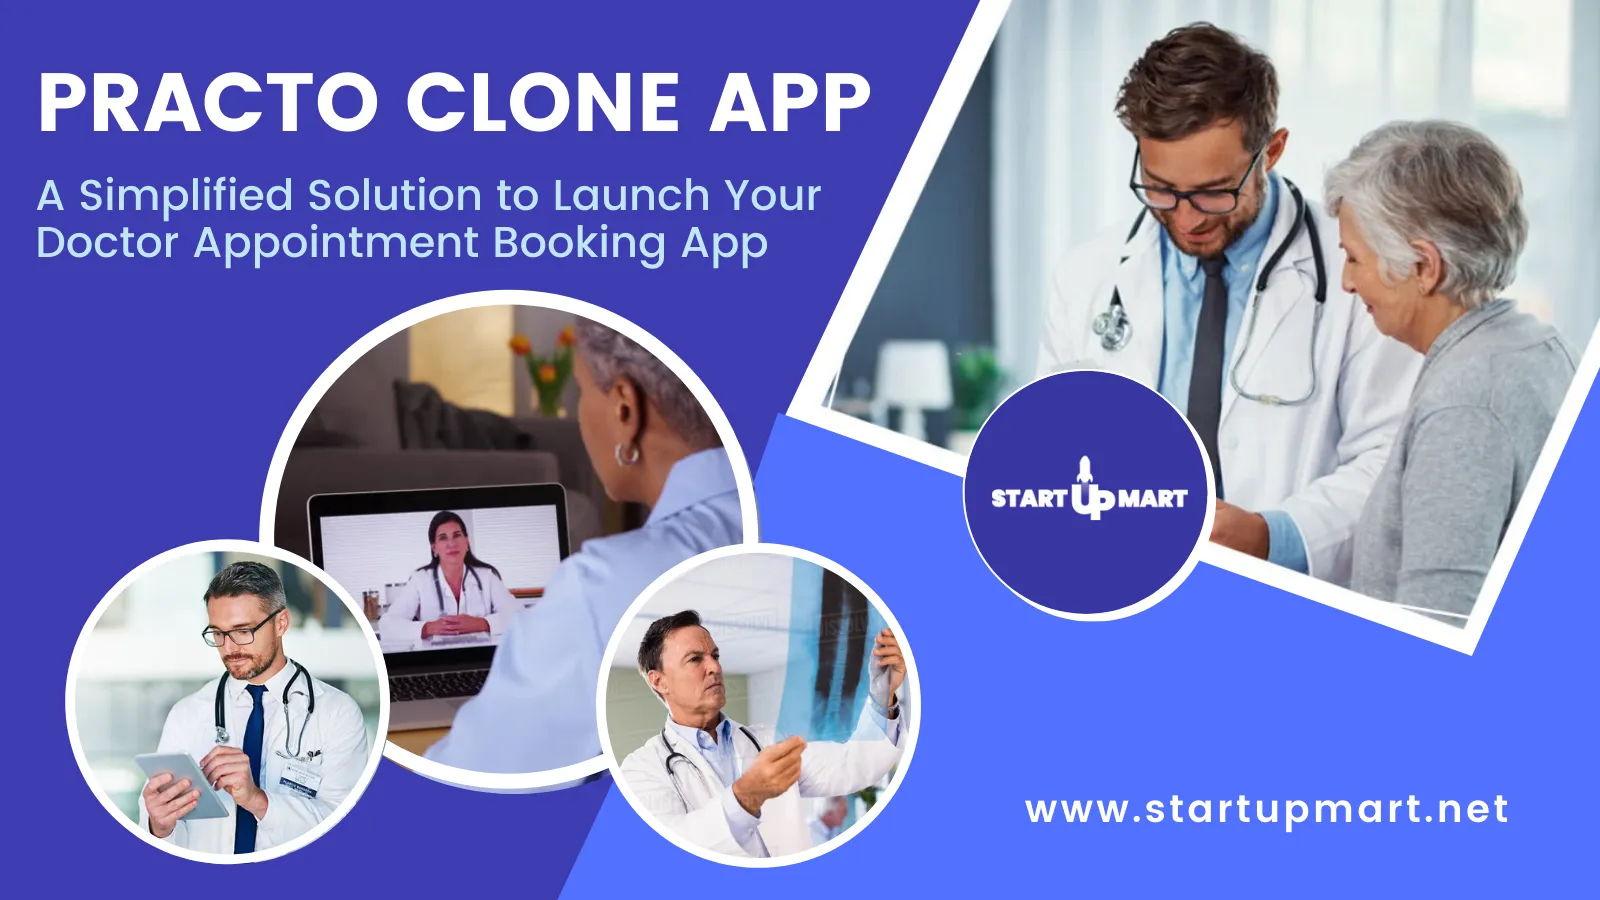 How Mobile Apps Is Helping Healthcare Providers/Practitioners?